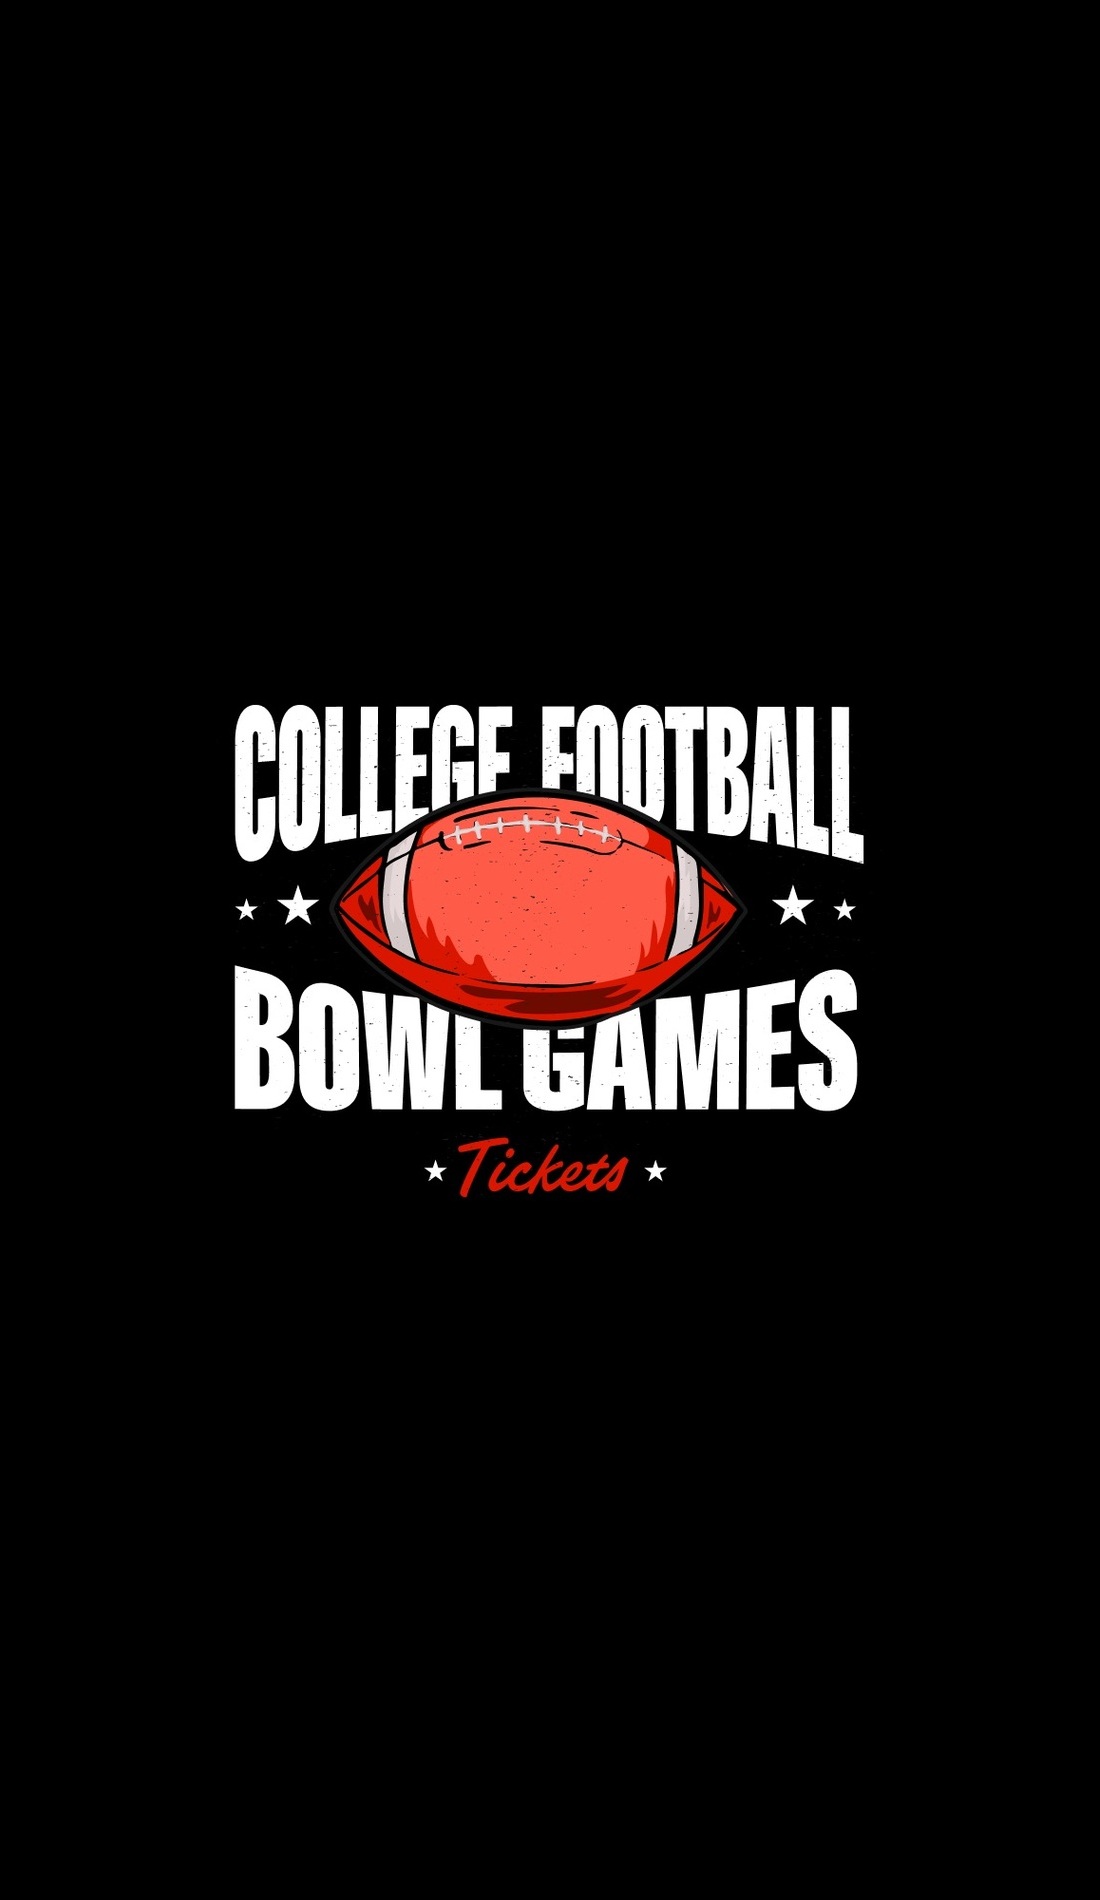 A College Football Bowl Games live event